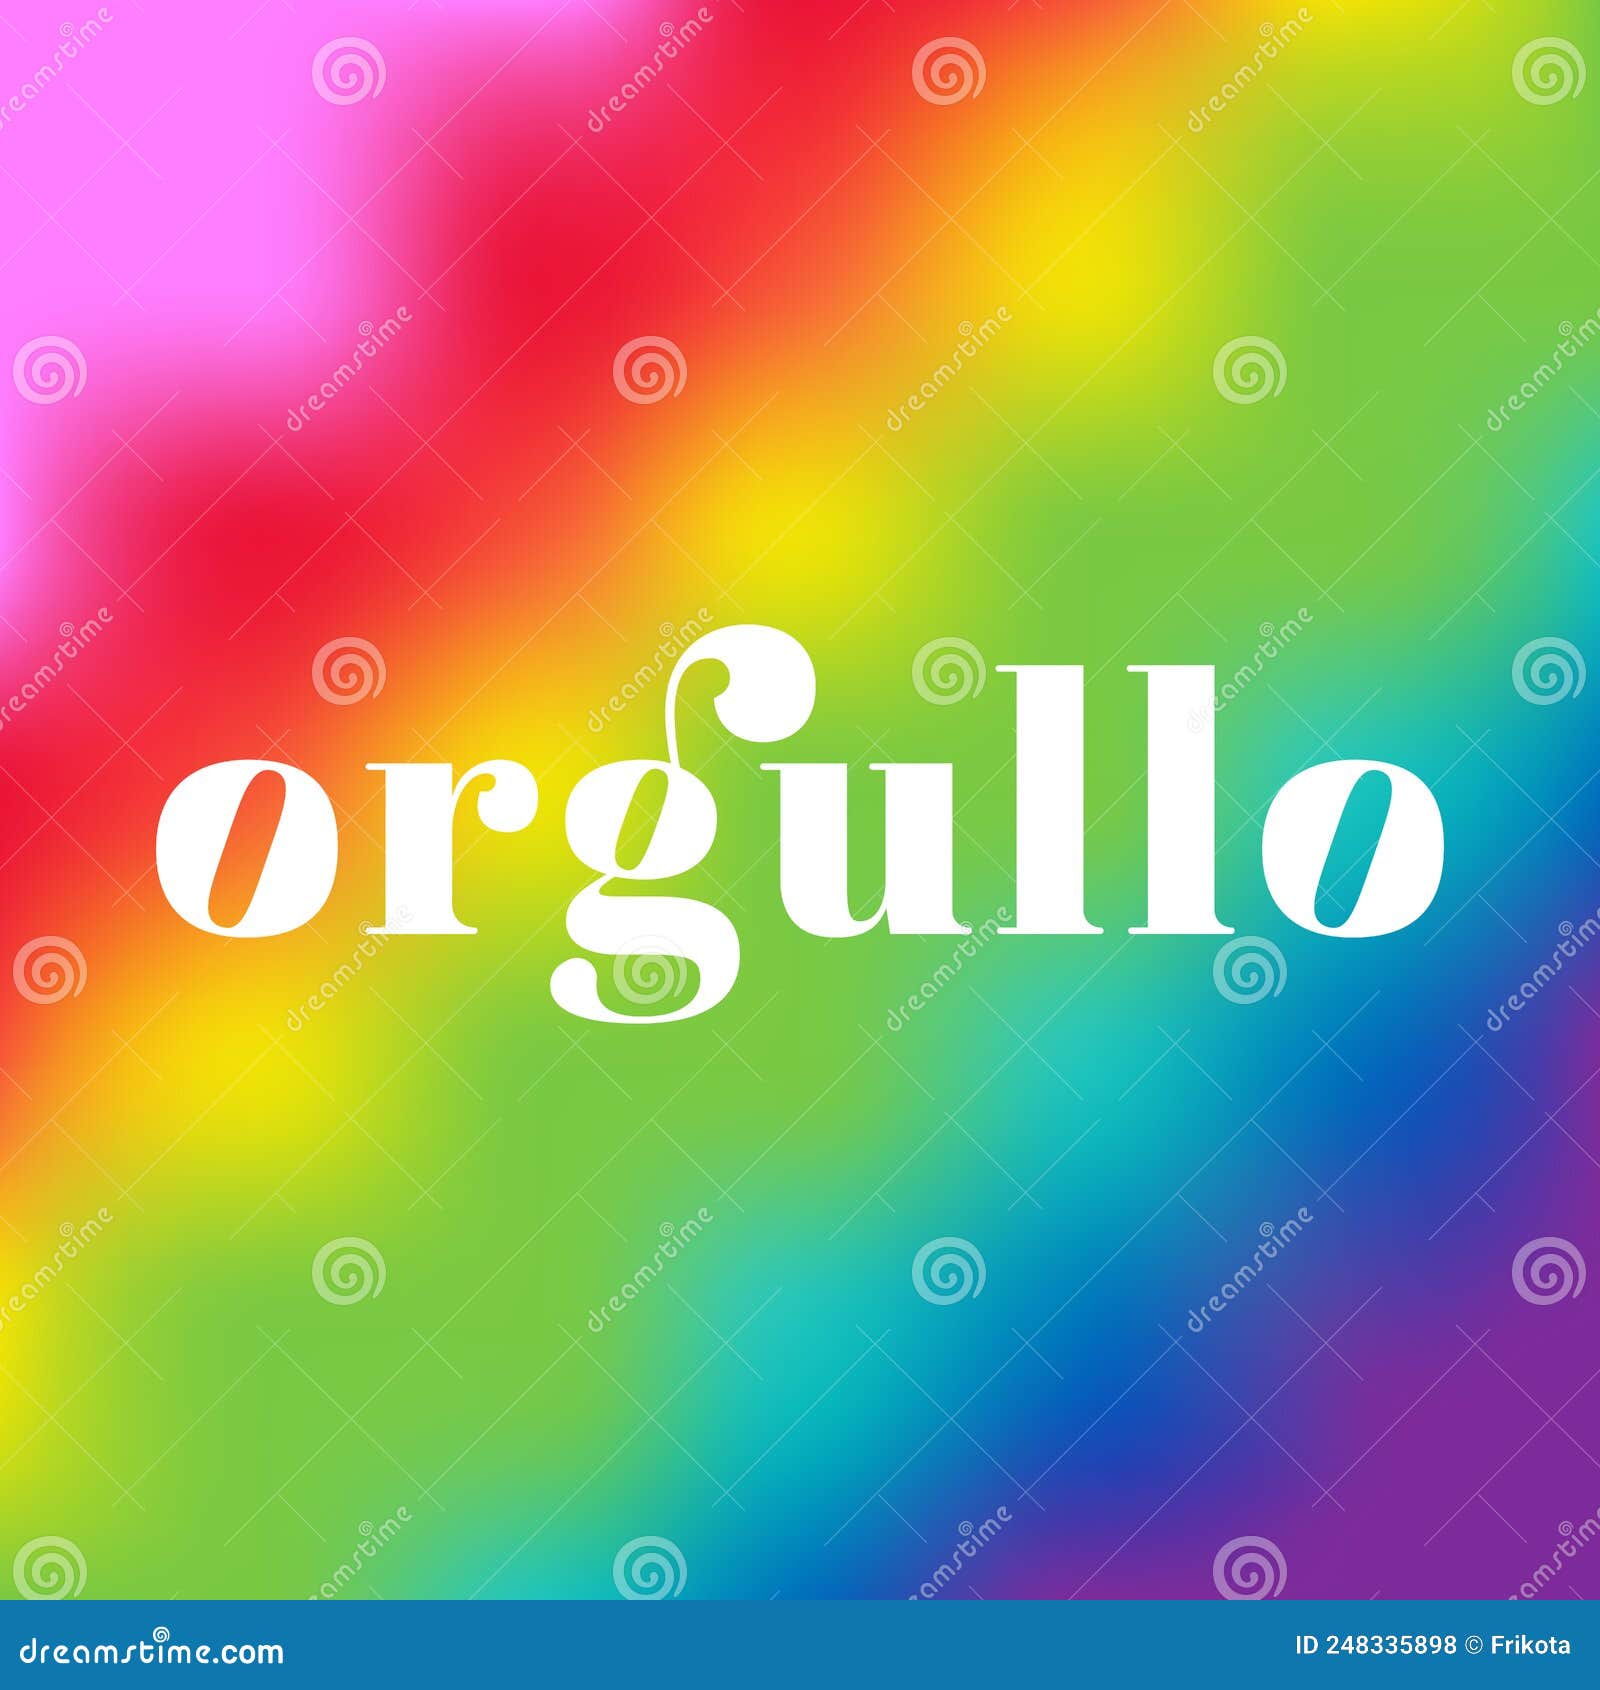 pride lgbtq abstract multicolor tie dye background. rainbow banner with the word pride in spanish: `orgullo`. lettering. gay pride